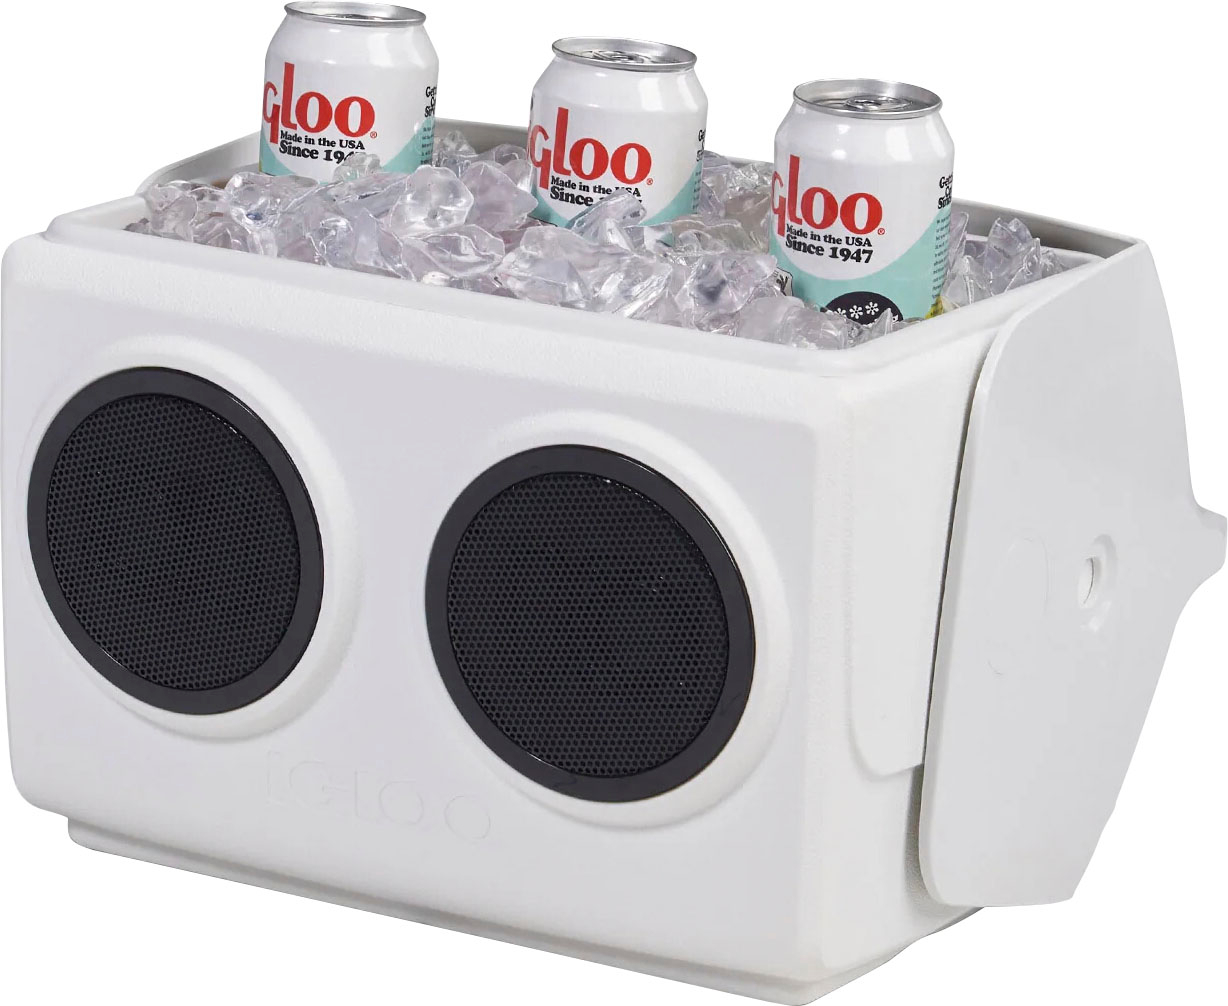 Spalding, Coleman, Igloo, and Aladdin coolers and